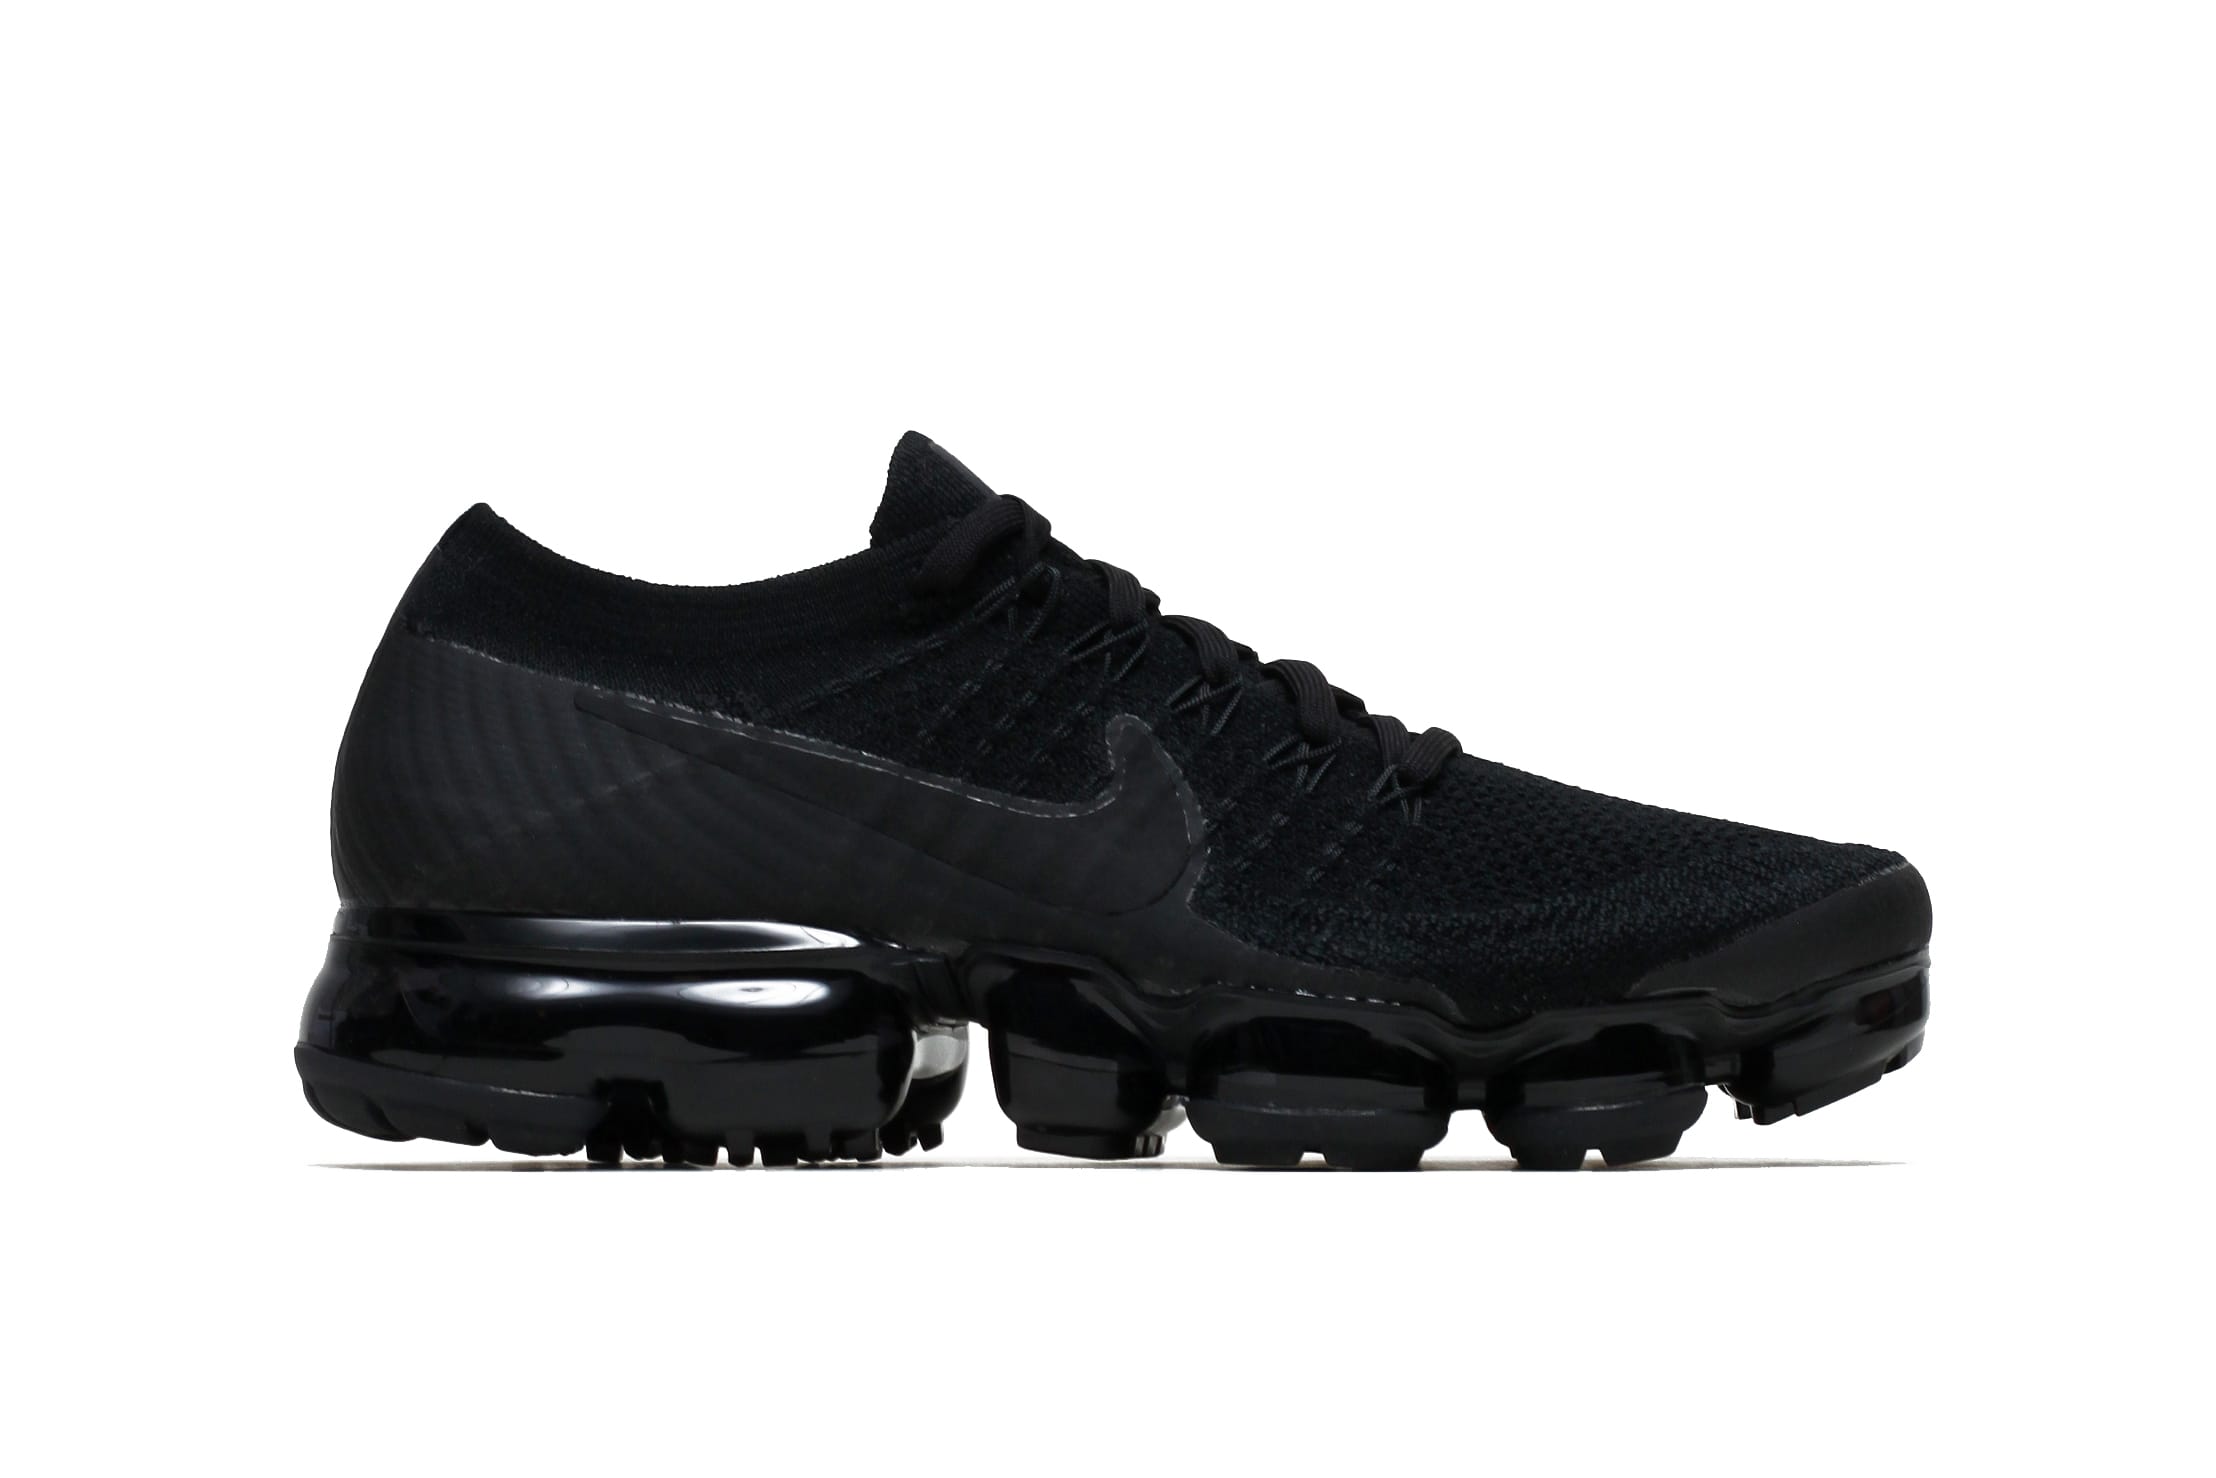 Peep the Nike Air VaporMax Flyknit in 